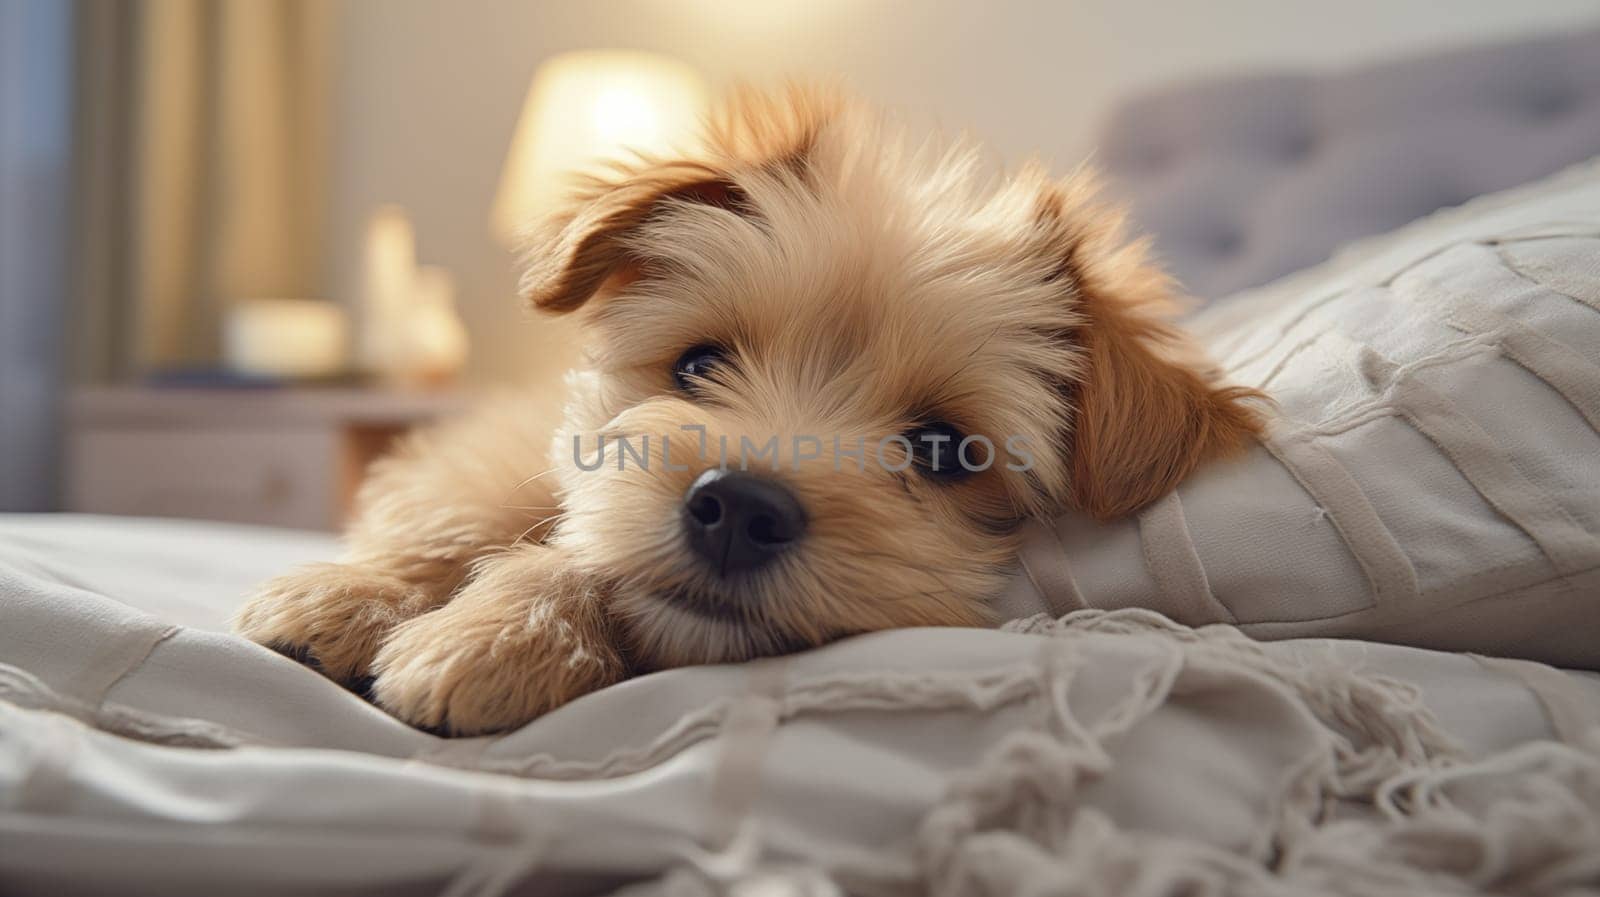 Adorable fluffy puppy lying down on a comfortable bed, looking at the camera with a soft gaze.